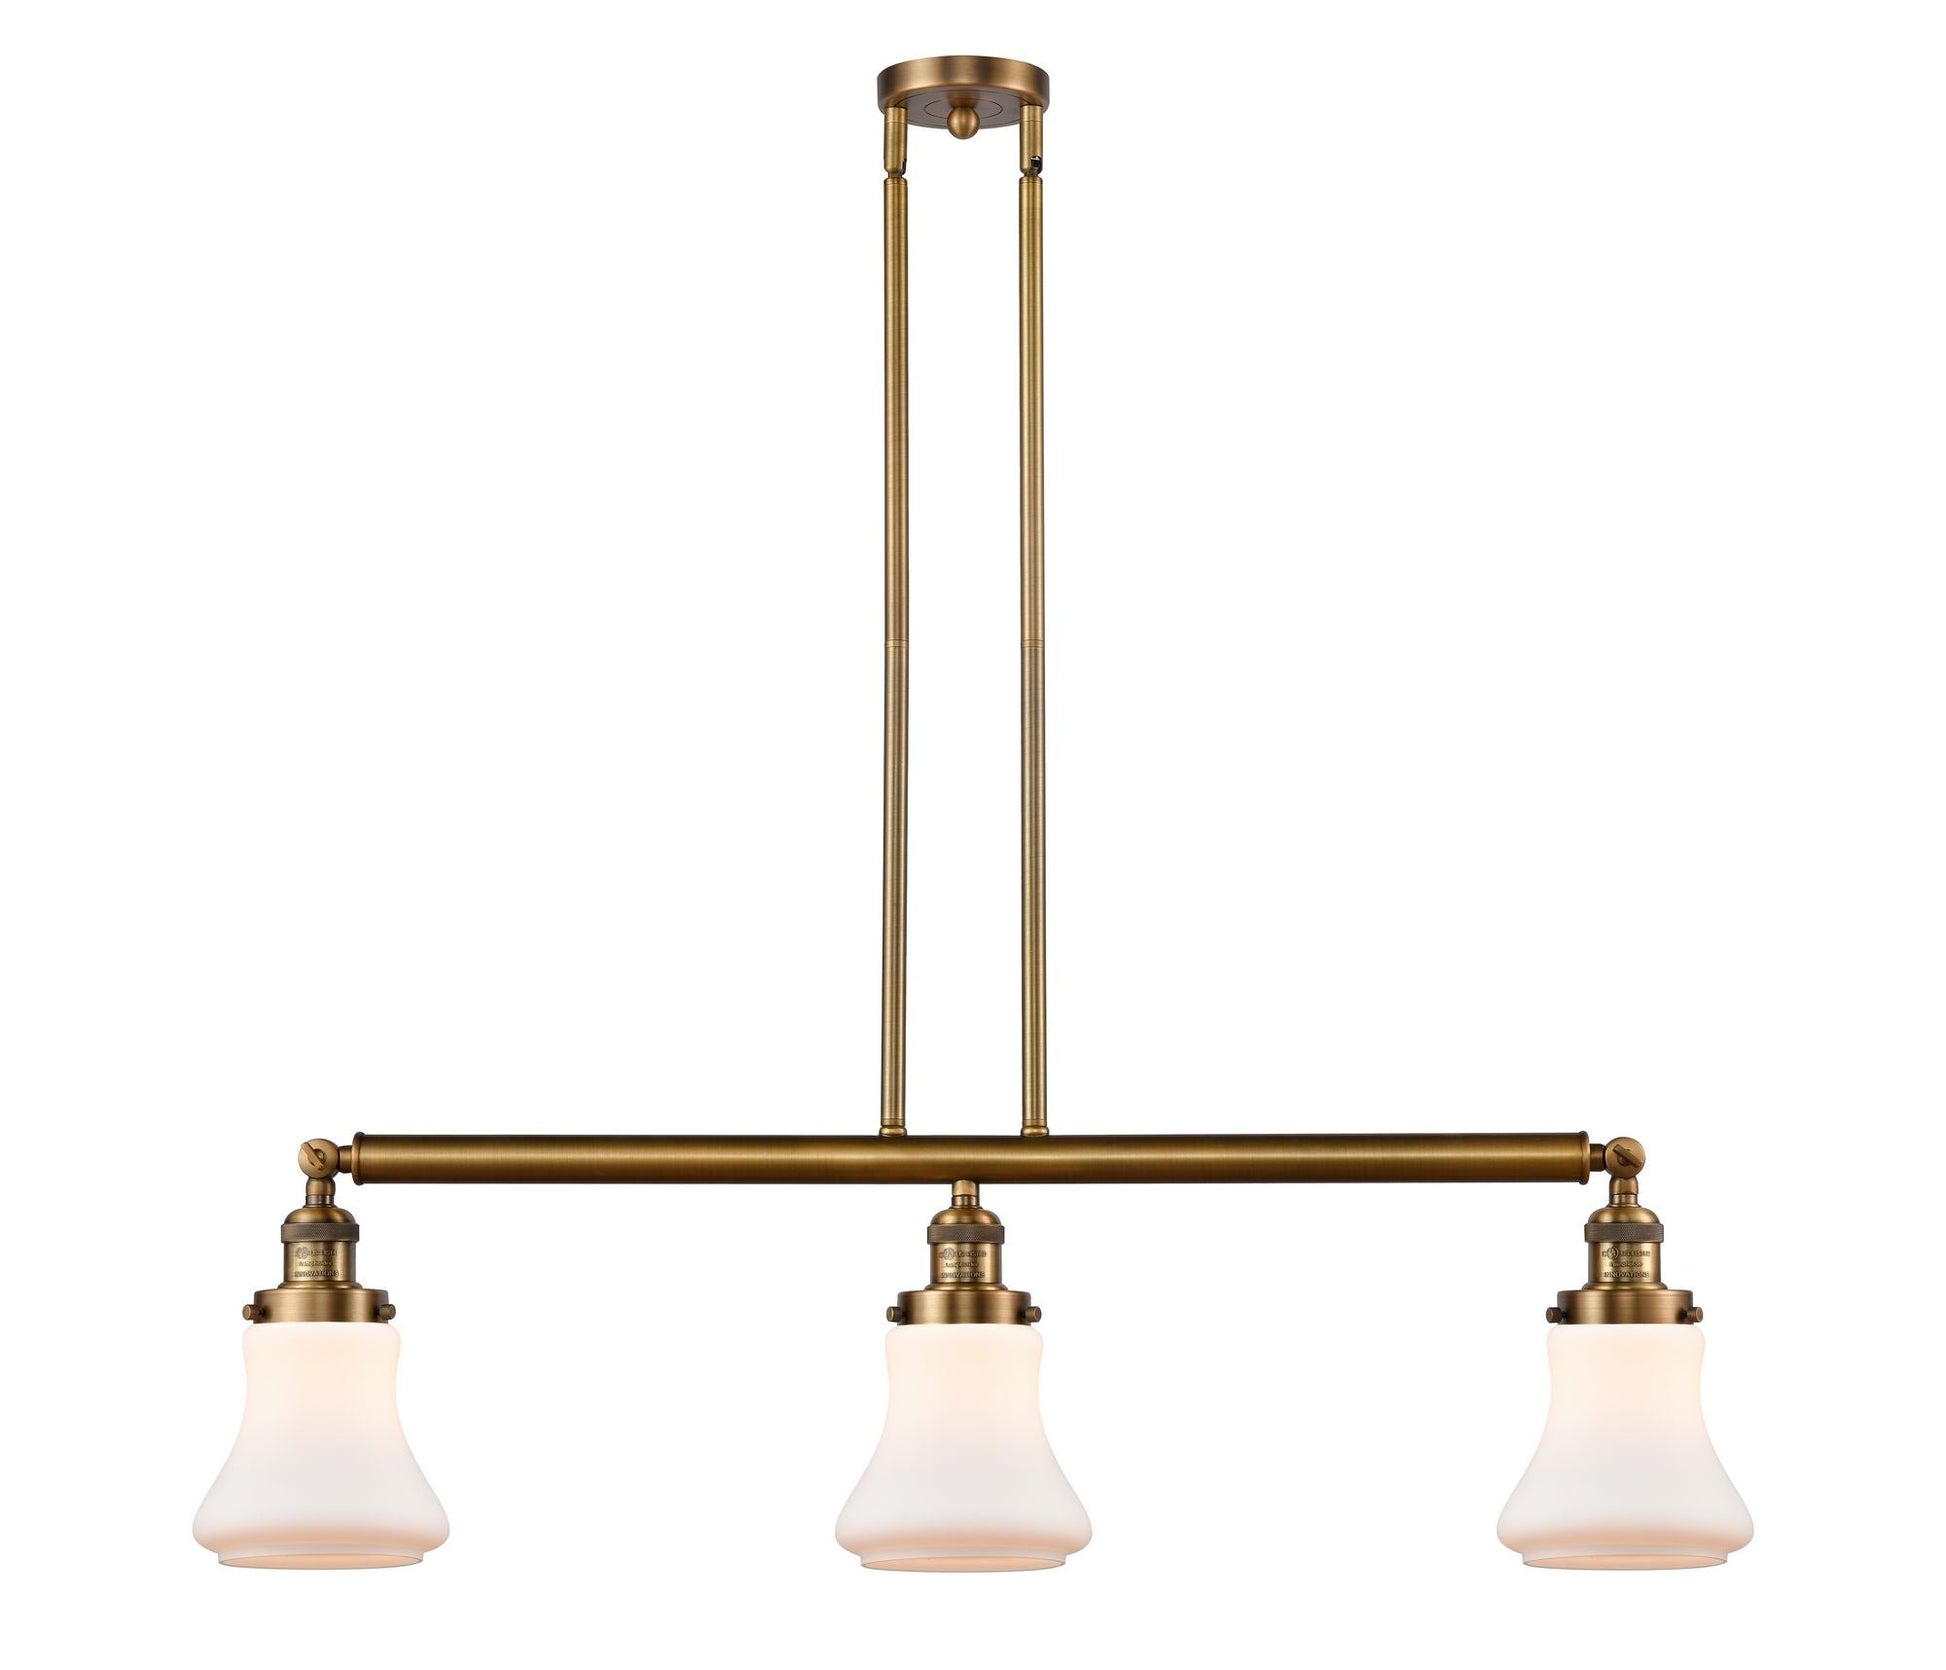 213-BB-G191 3-Light 38.75" Brushed Brass Island Light - Matte White Bellmont Glass - LED Bulb - Dimmensions: 38.75 x 6.25 x 11<br>Minimum Height : 20.5<br>Maximum Height : 44.5 - Sloped Ceiling Compatible: Yes